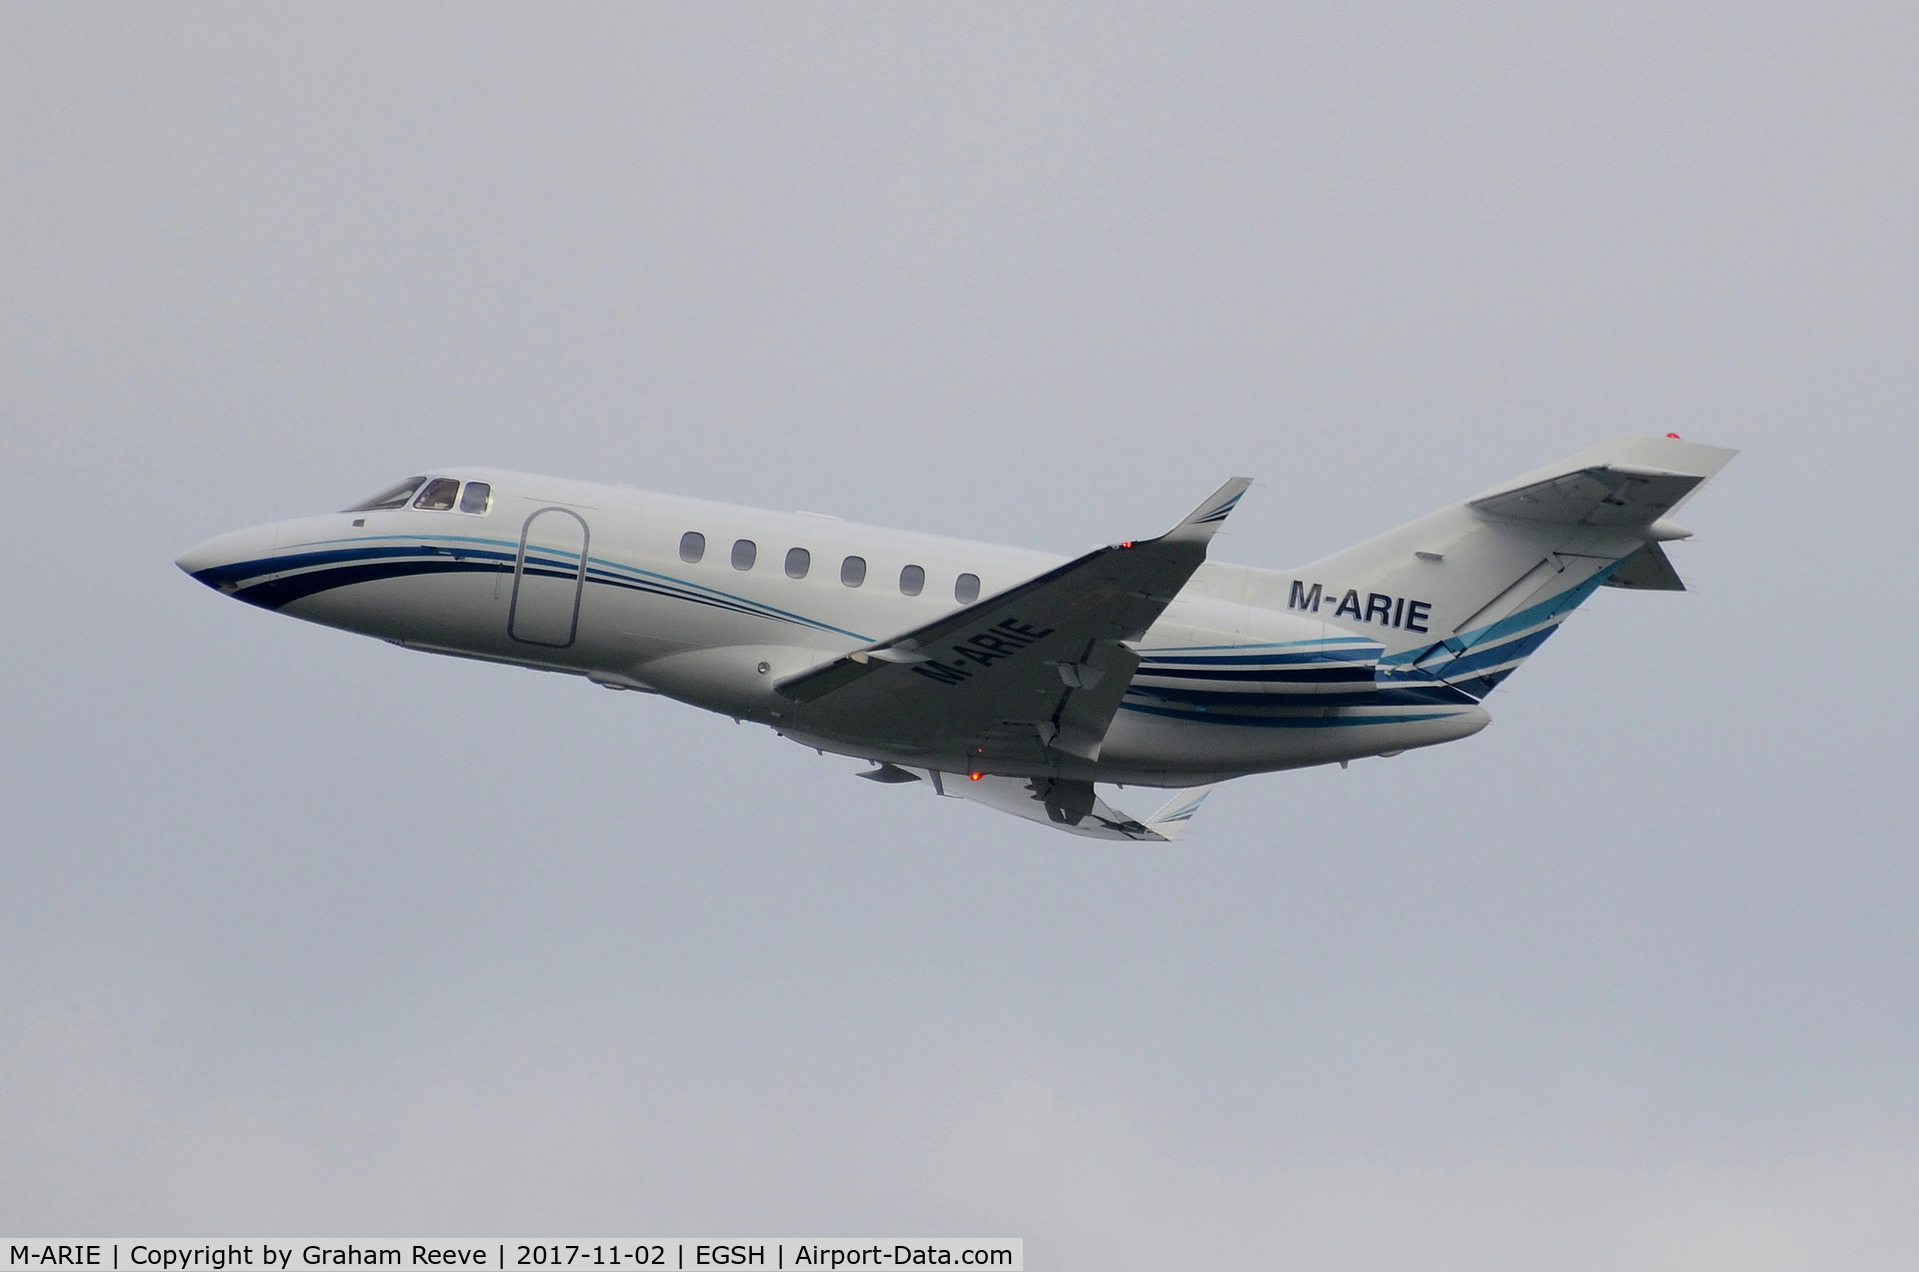 M-ARIE, 2002 Raytheon Hawker 800XP C/N 258600, Departing from Norwich.